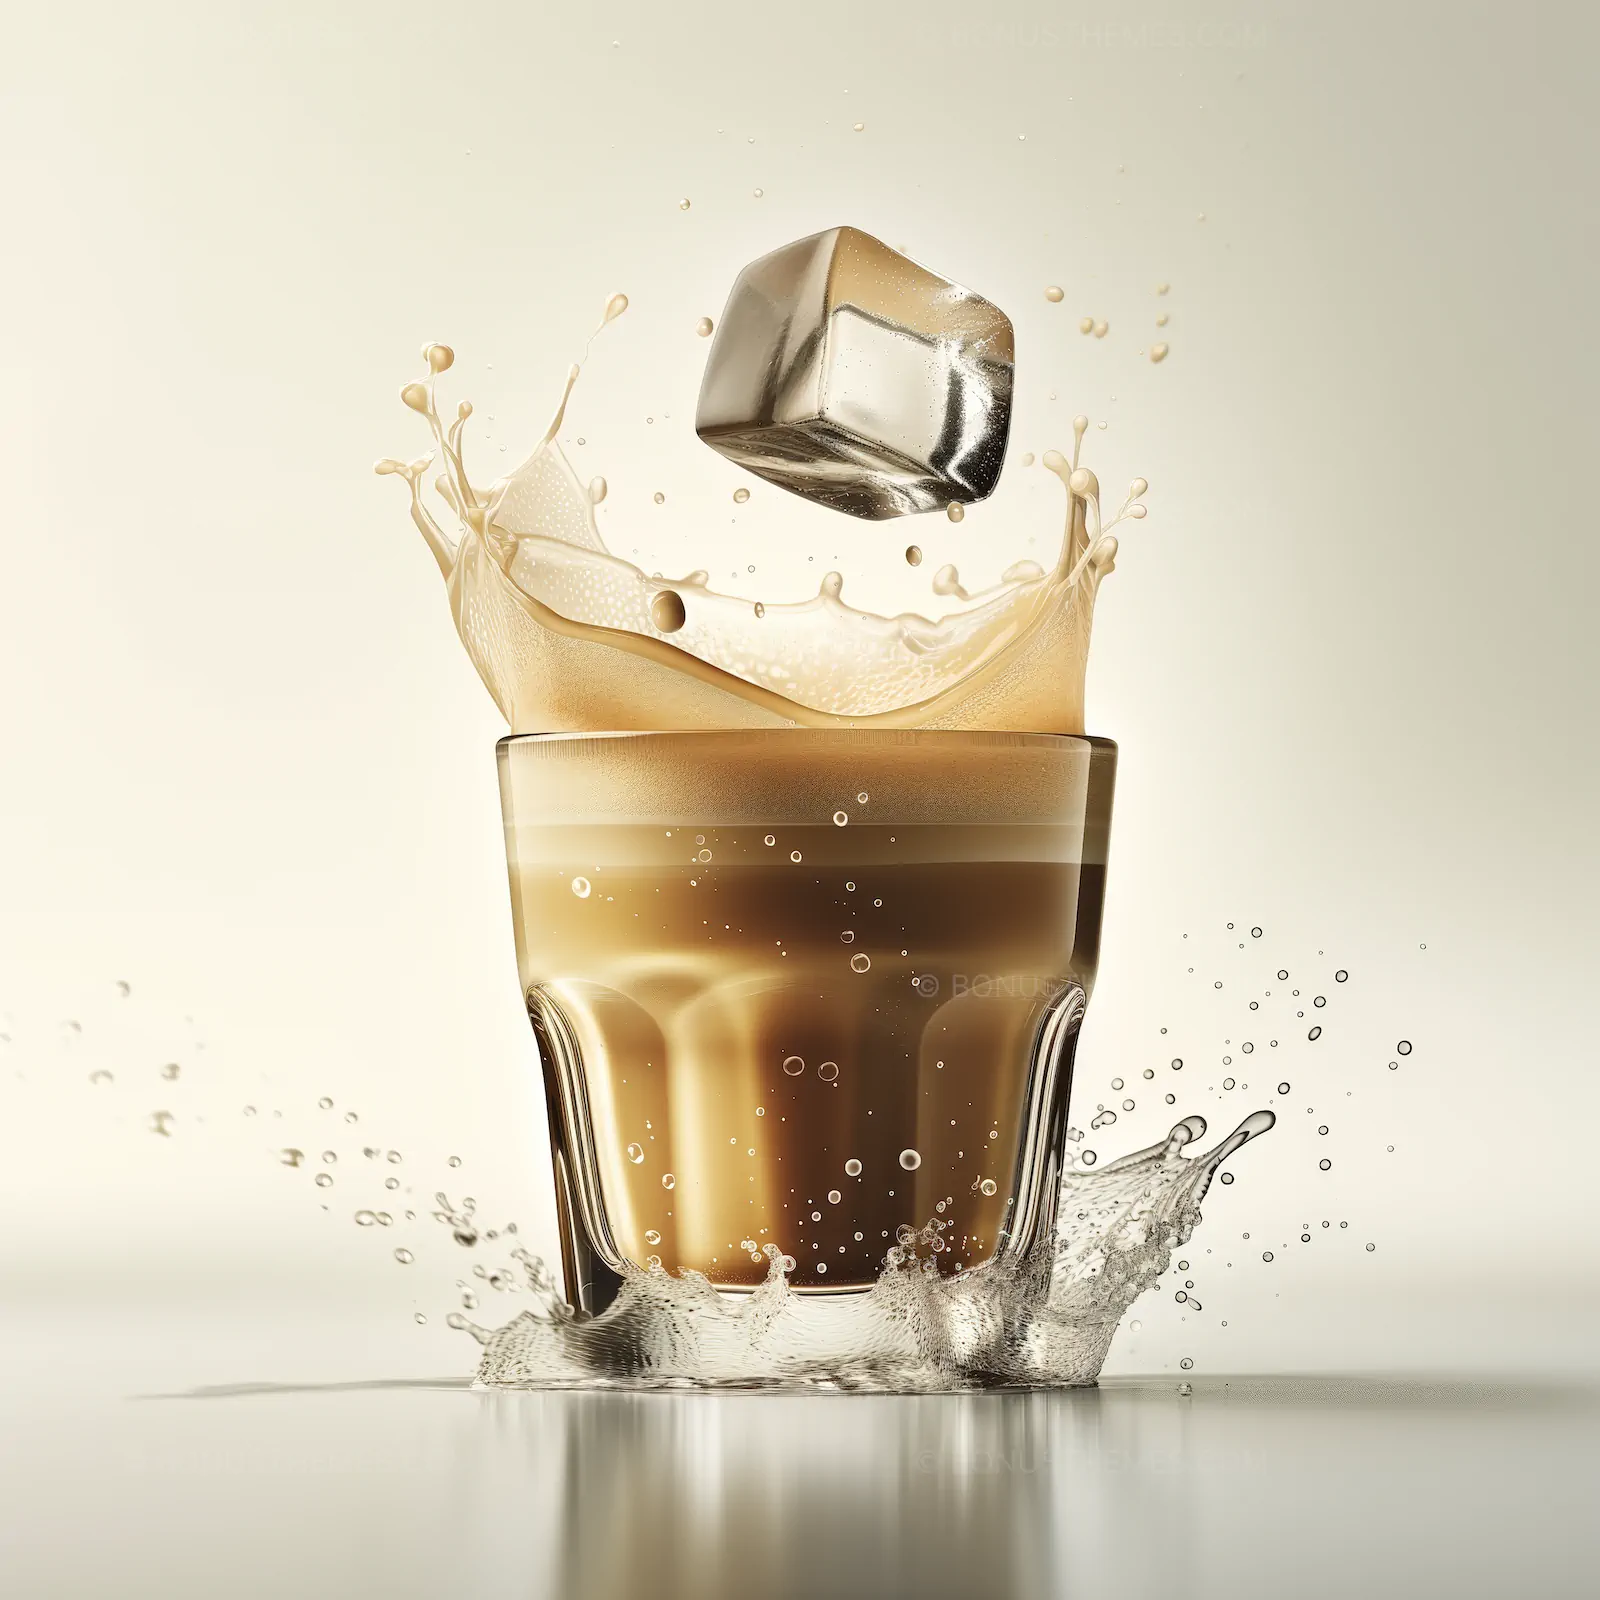 Frozen elegance, whirling ice coffee